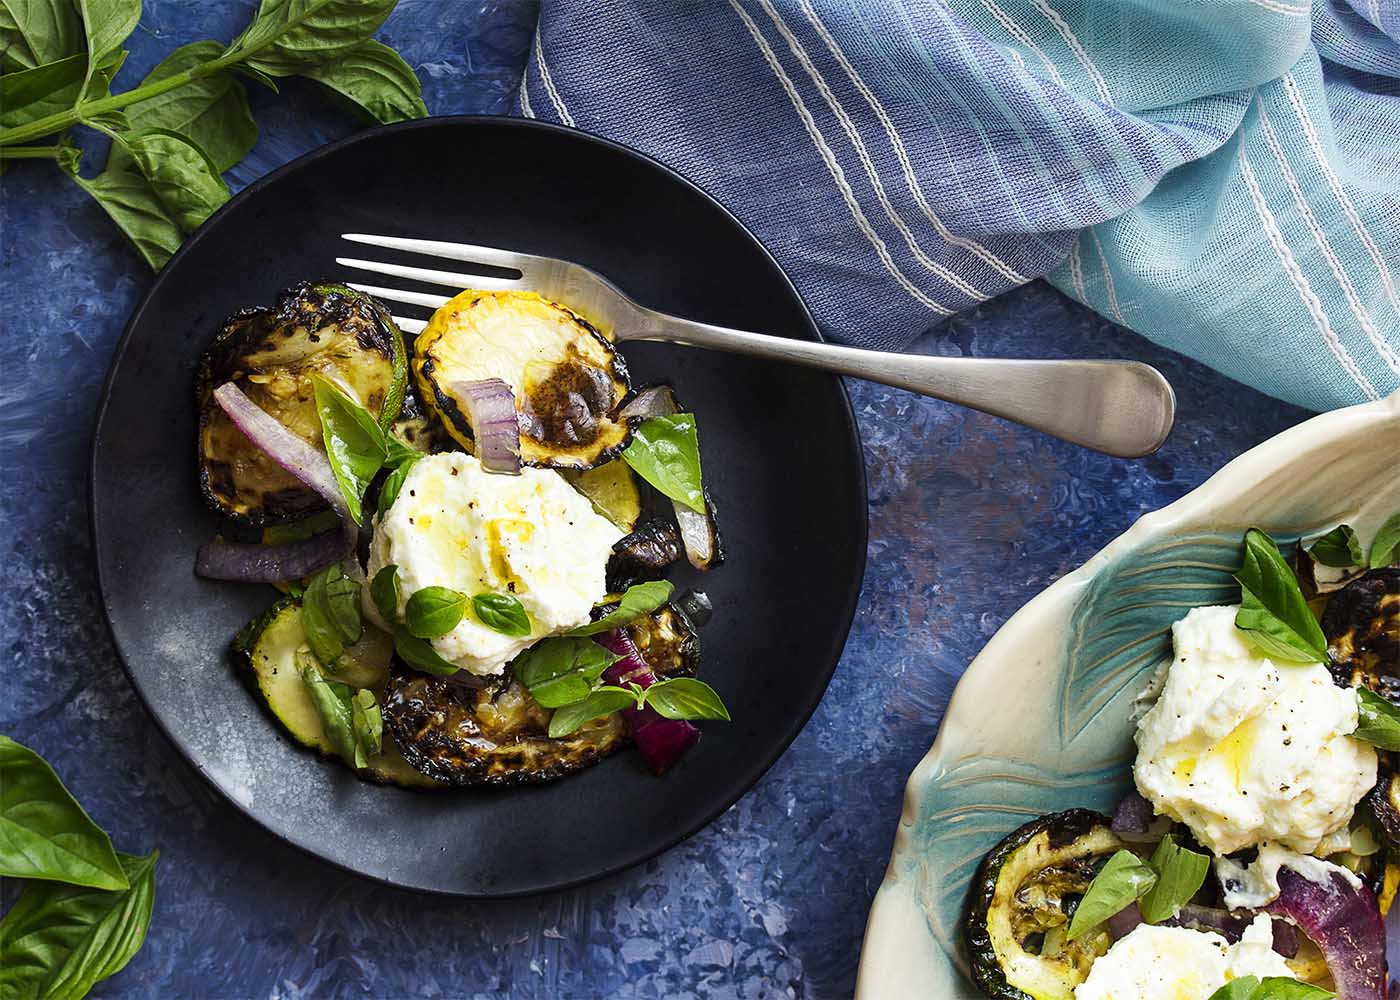 A plate of grilled zucchini salad with lemon ricotta dolloped on top.